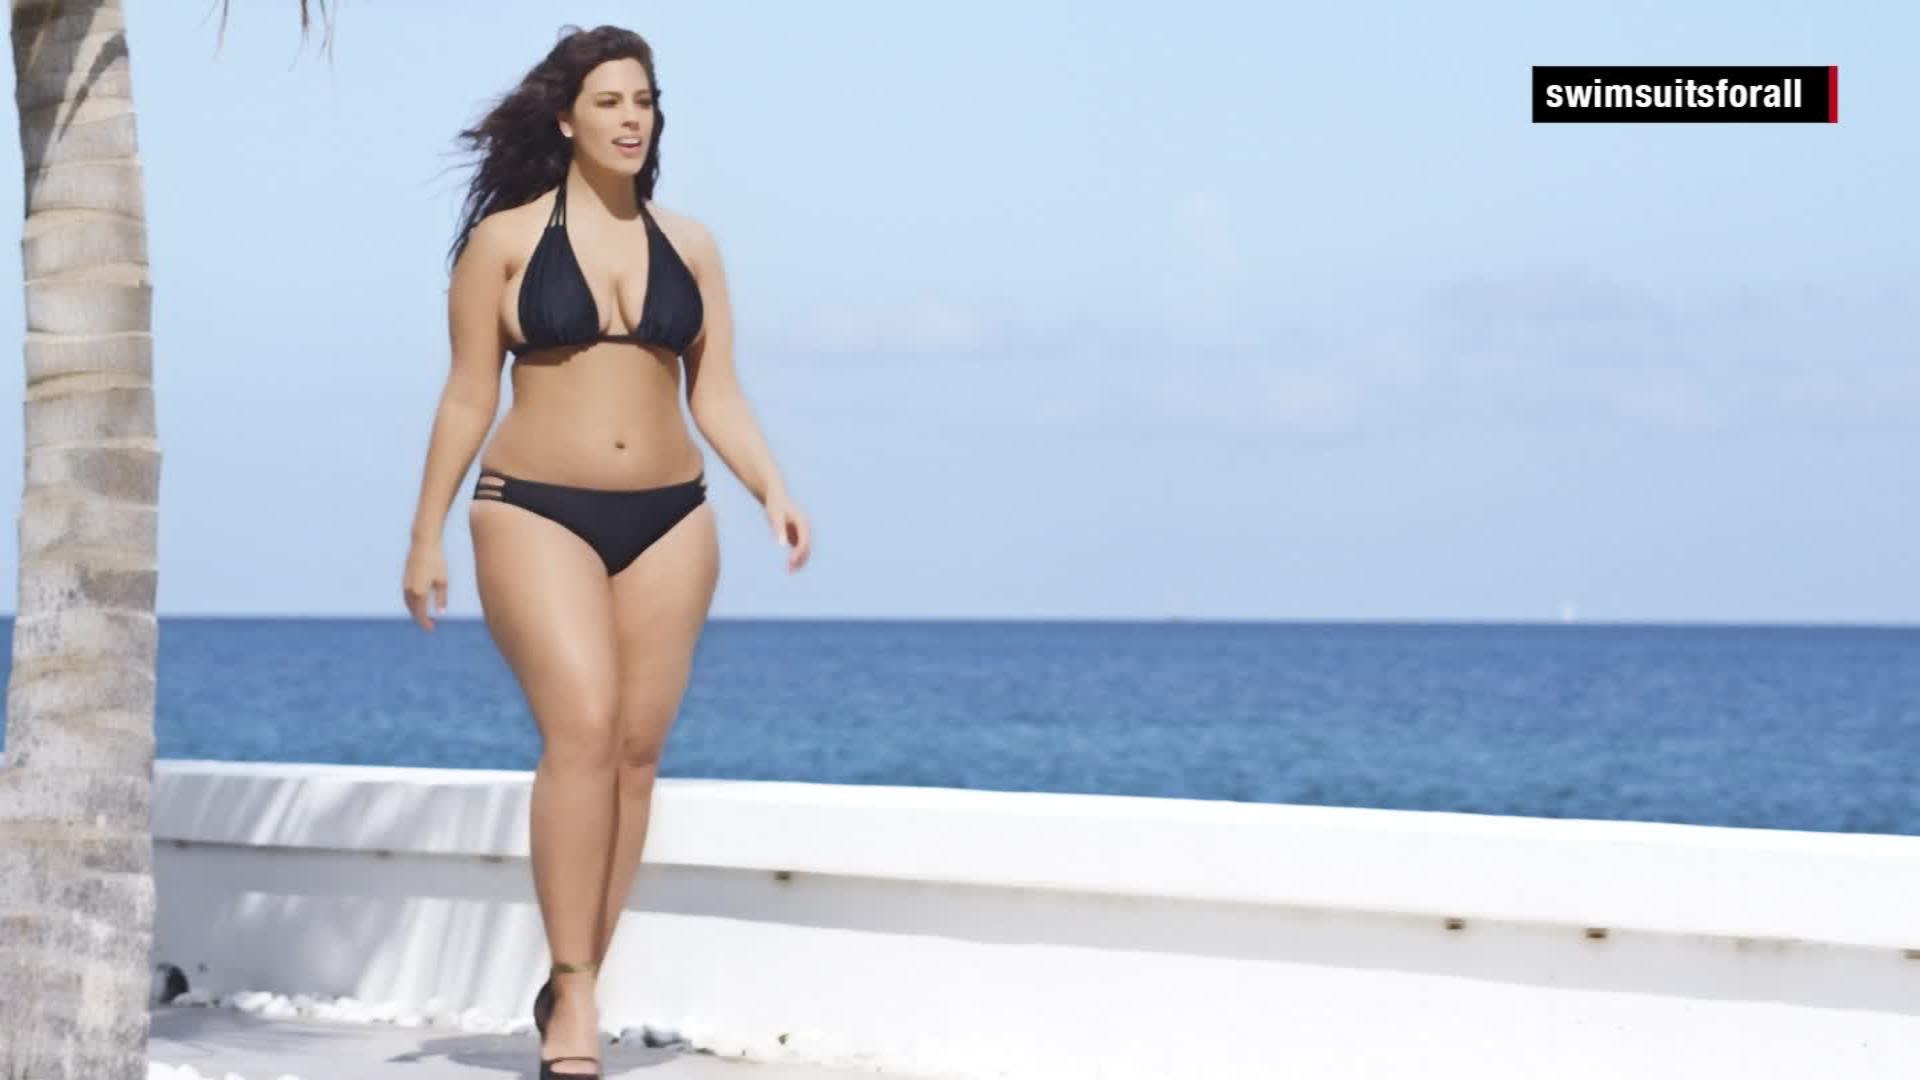 Plus-size models give SI's swimsuit edition more curves